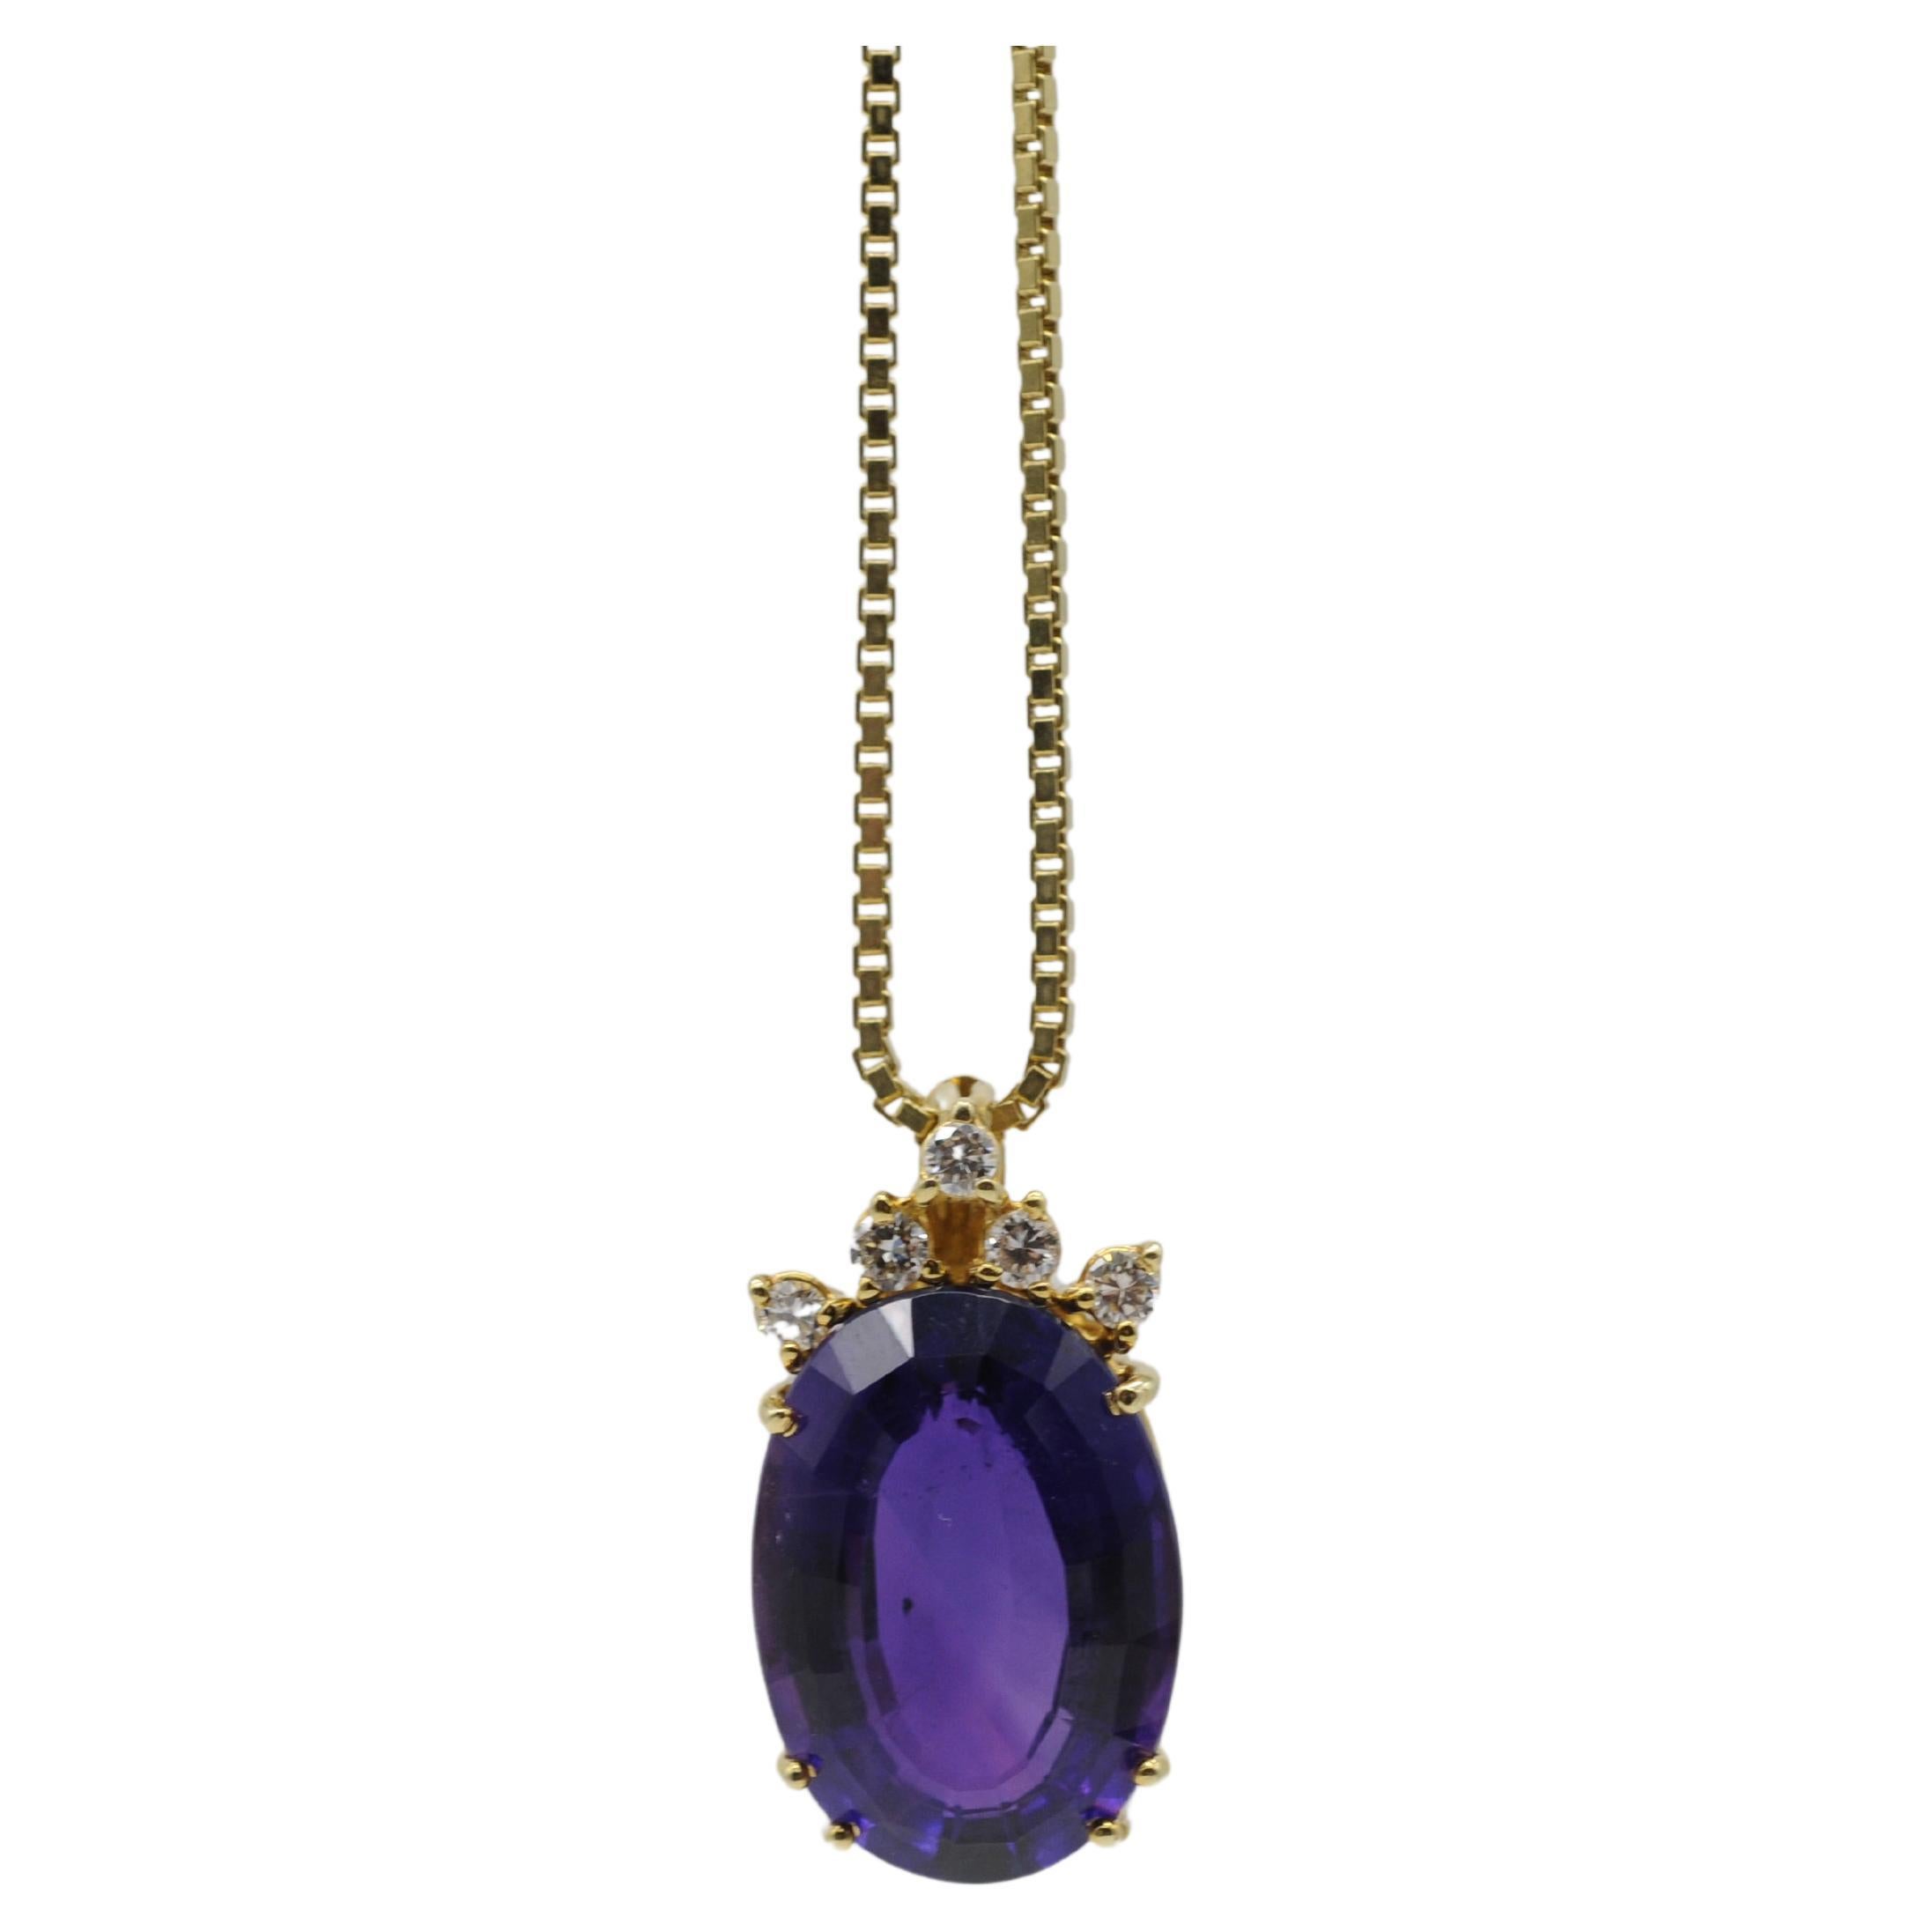 Art deco necklace with amethyst and diamonds